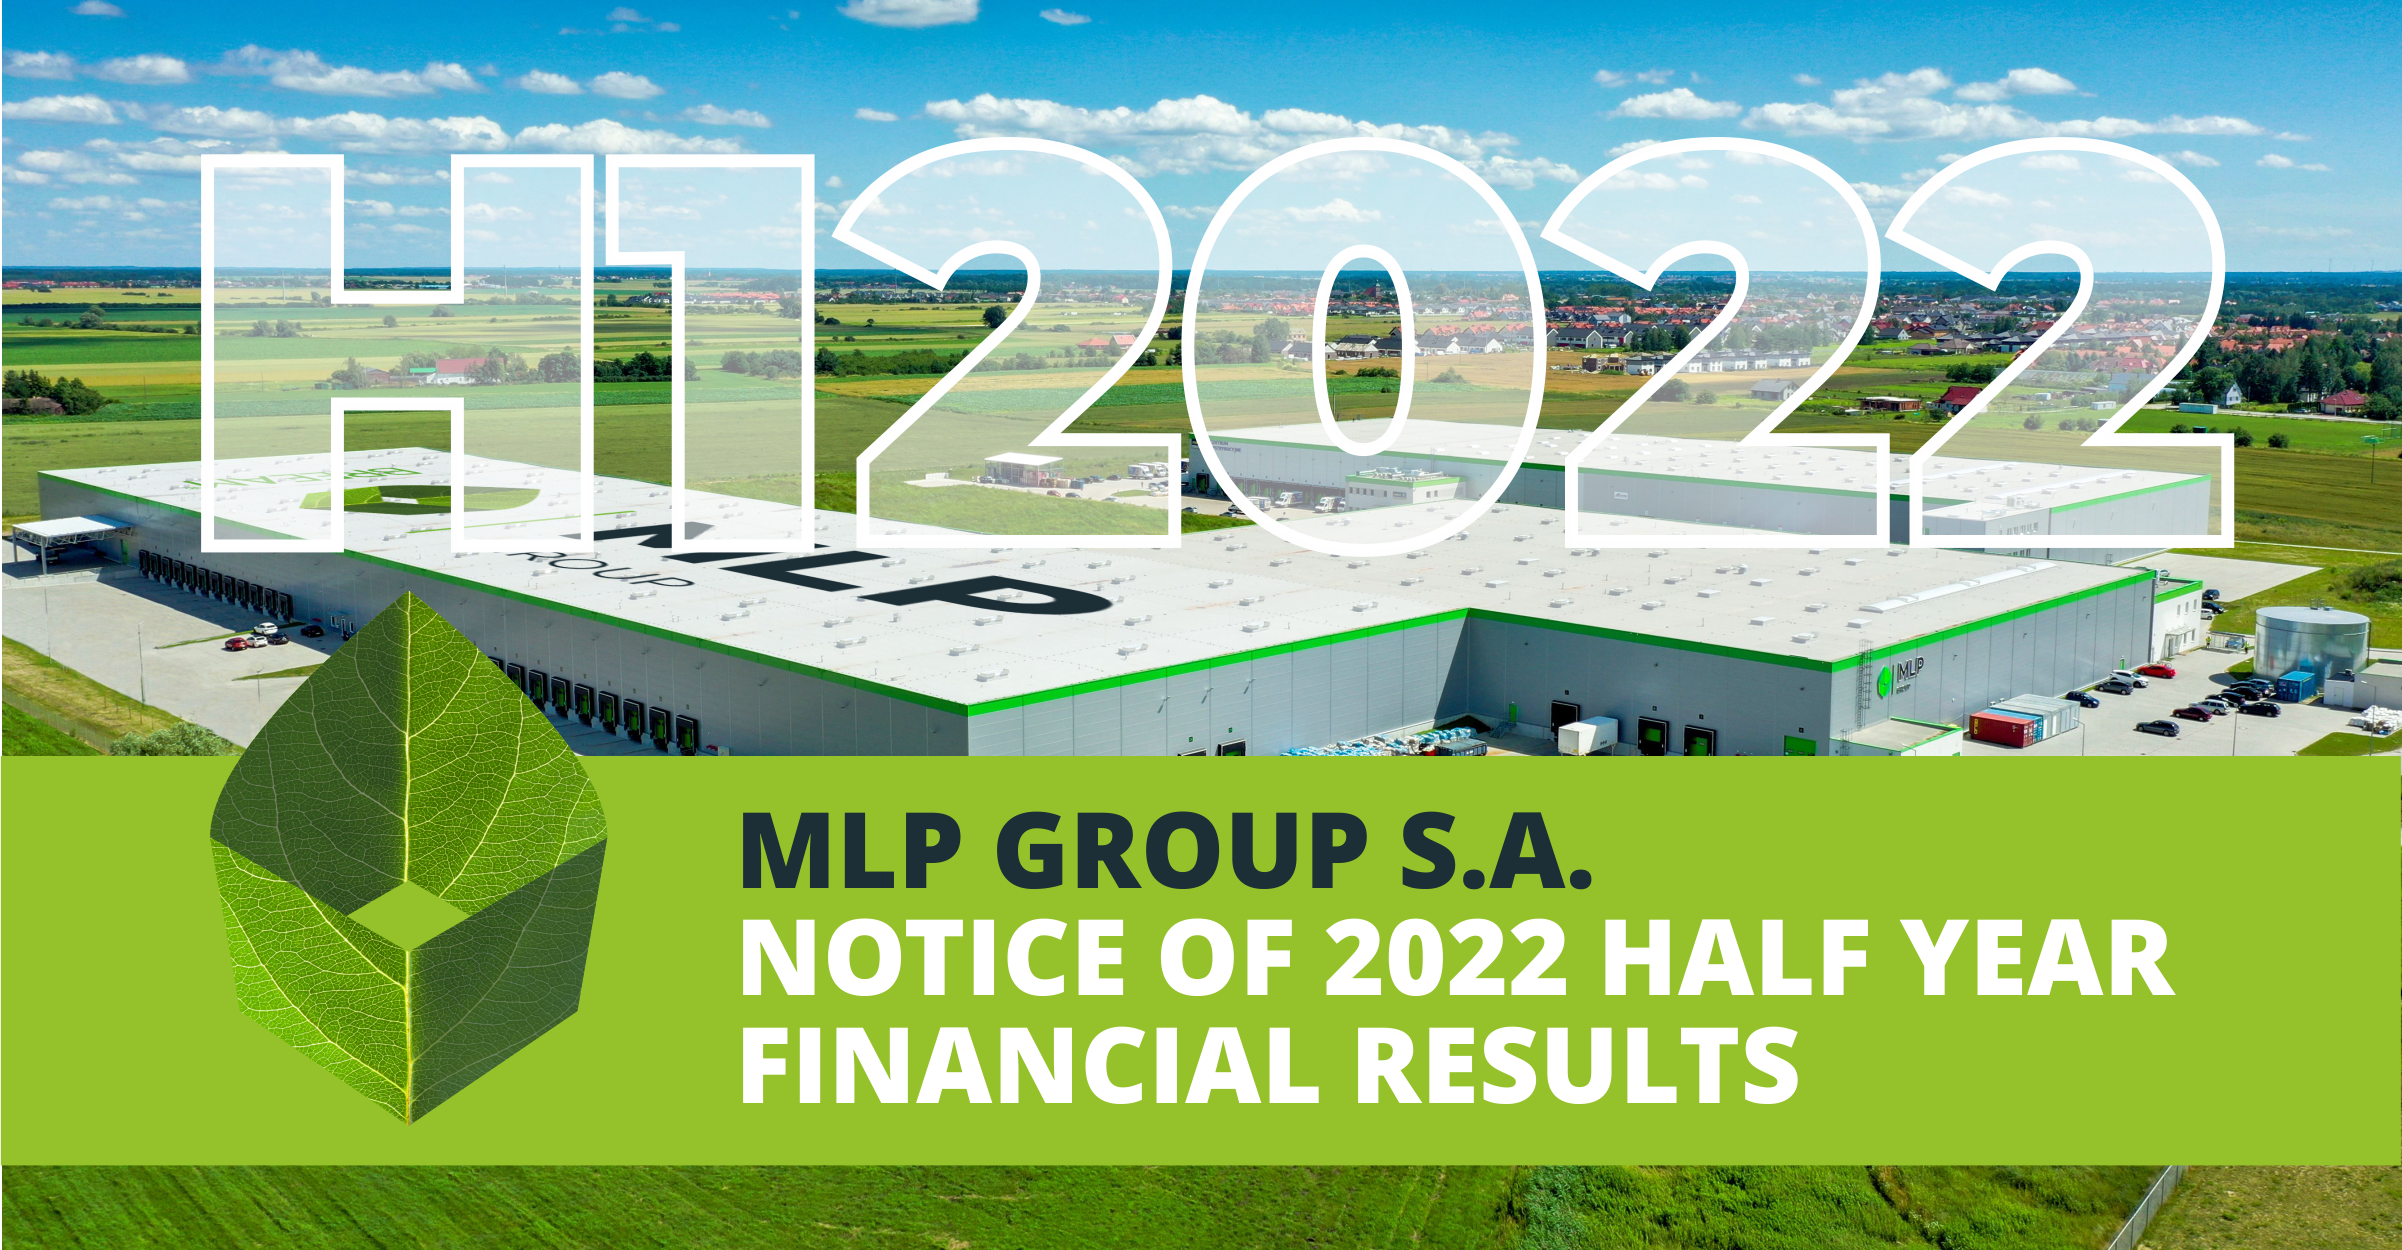 MLP GROUP S.A. NOTICE OF 2022 HALF YEAR FINANCIAL RESULTS